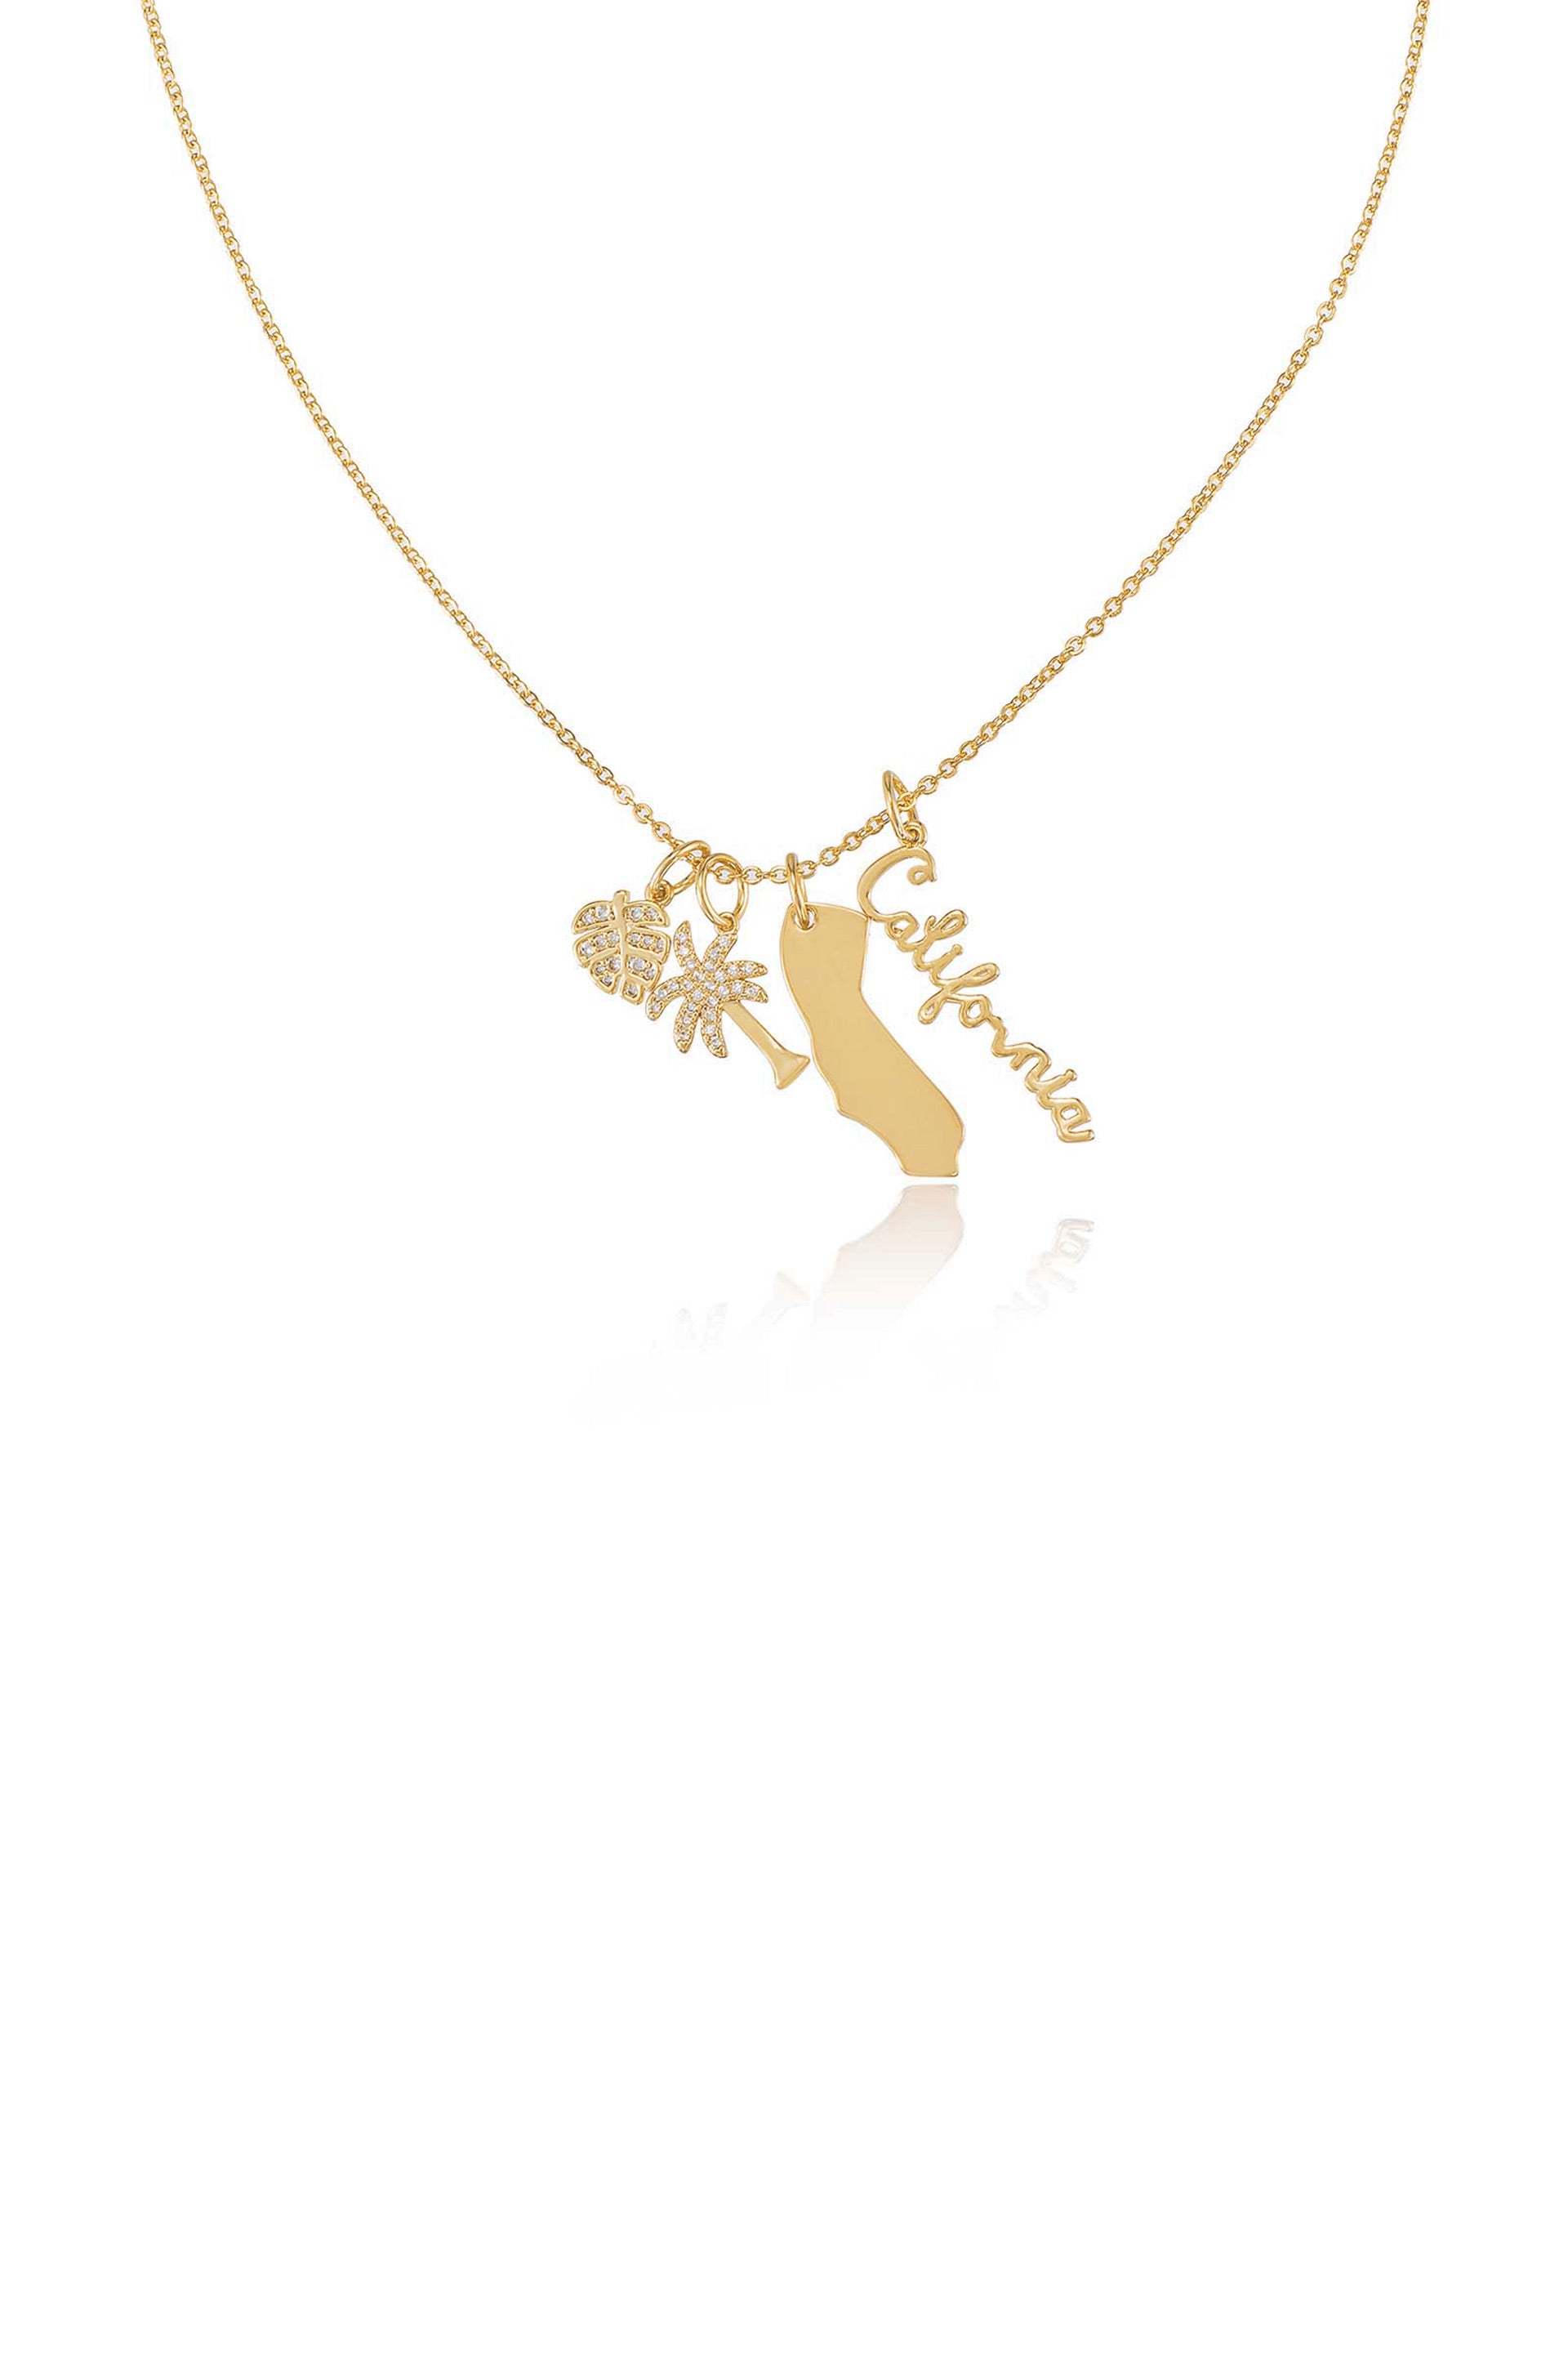 California Cool 18k Gold Plated Interchangeable Charm Necklace